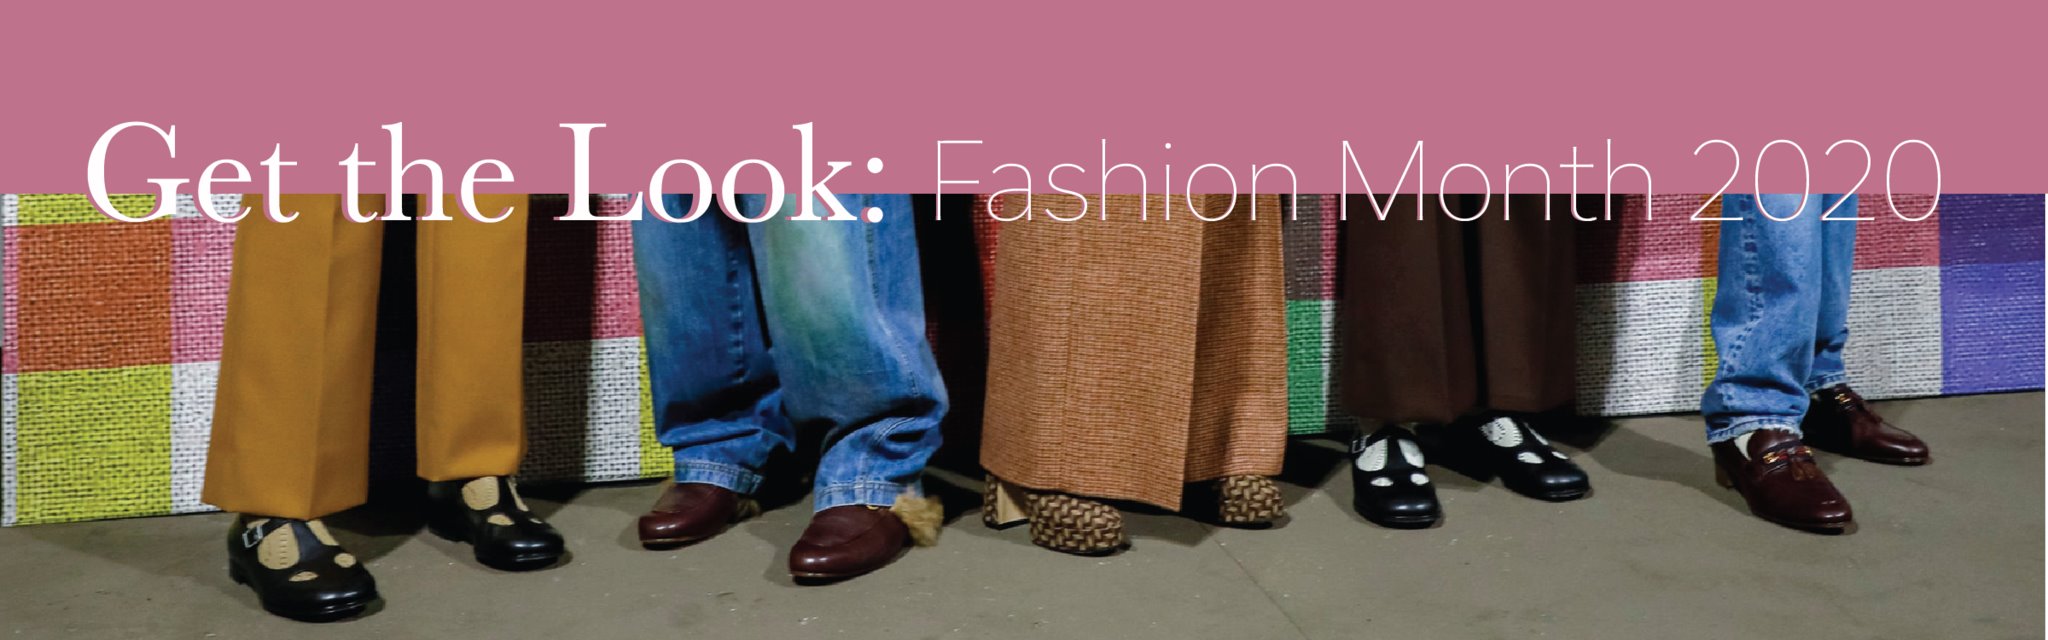 Get the Look: Fashion Month 2020